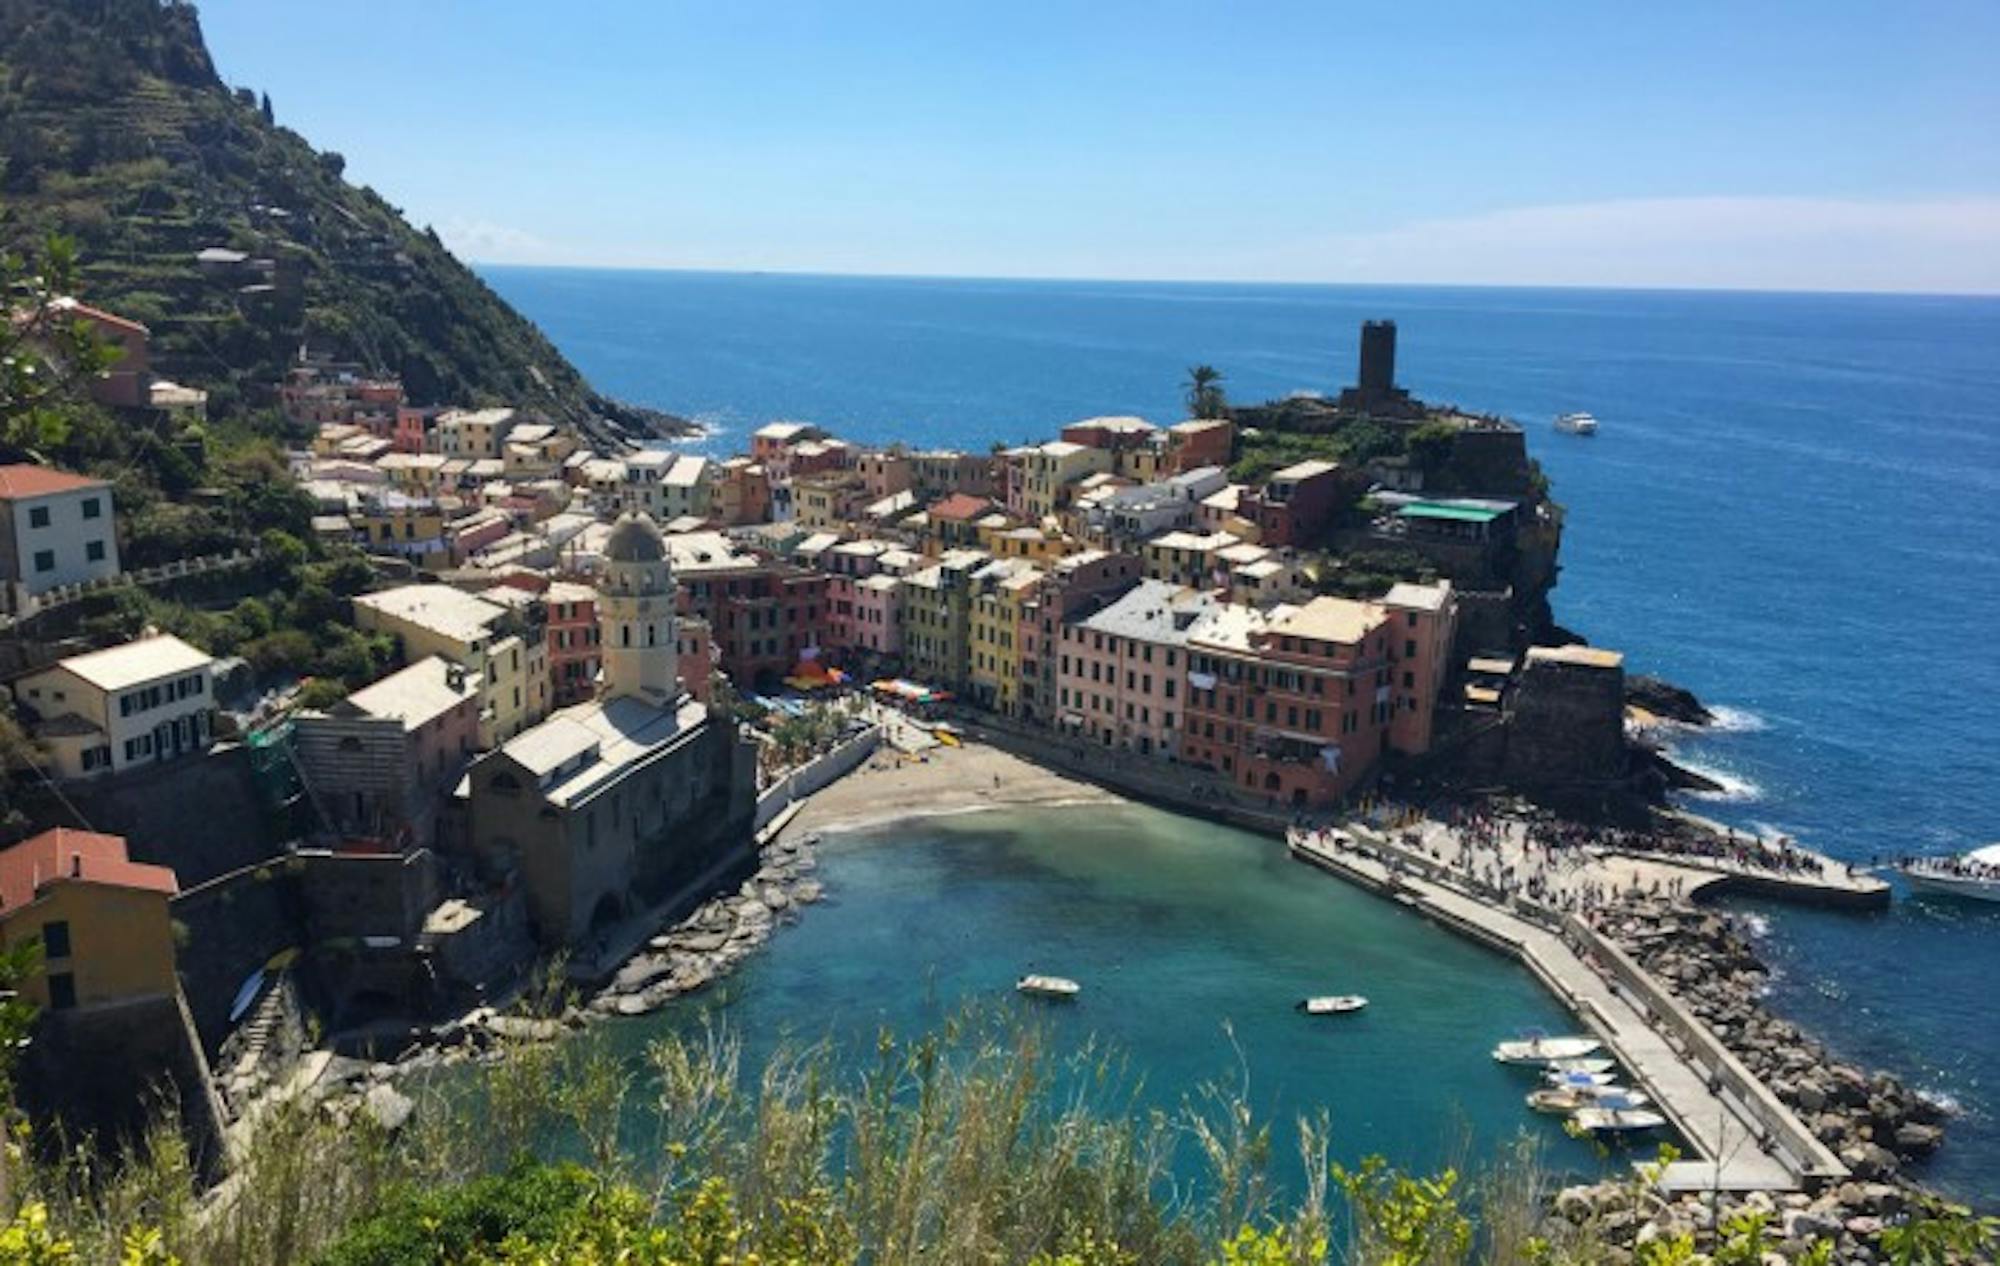 The Italian town of Vernazza, located along the Cinque Terre hiking trail, is one of many places visited by Notre Dame students studying abroad.